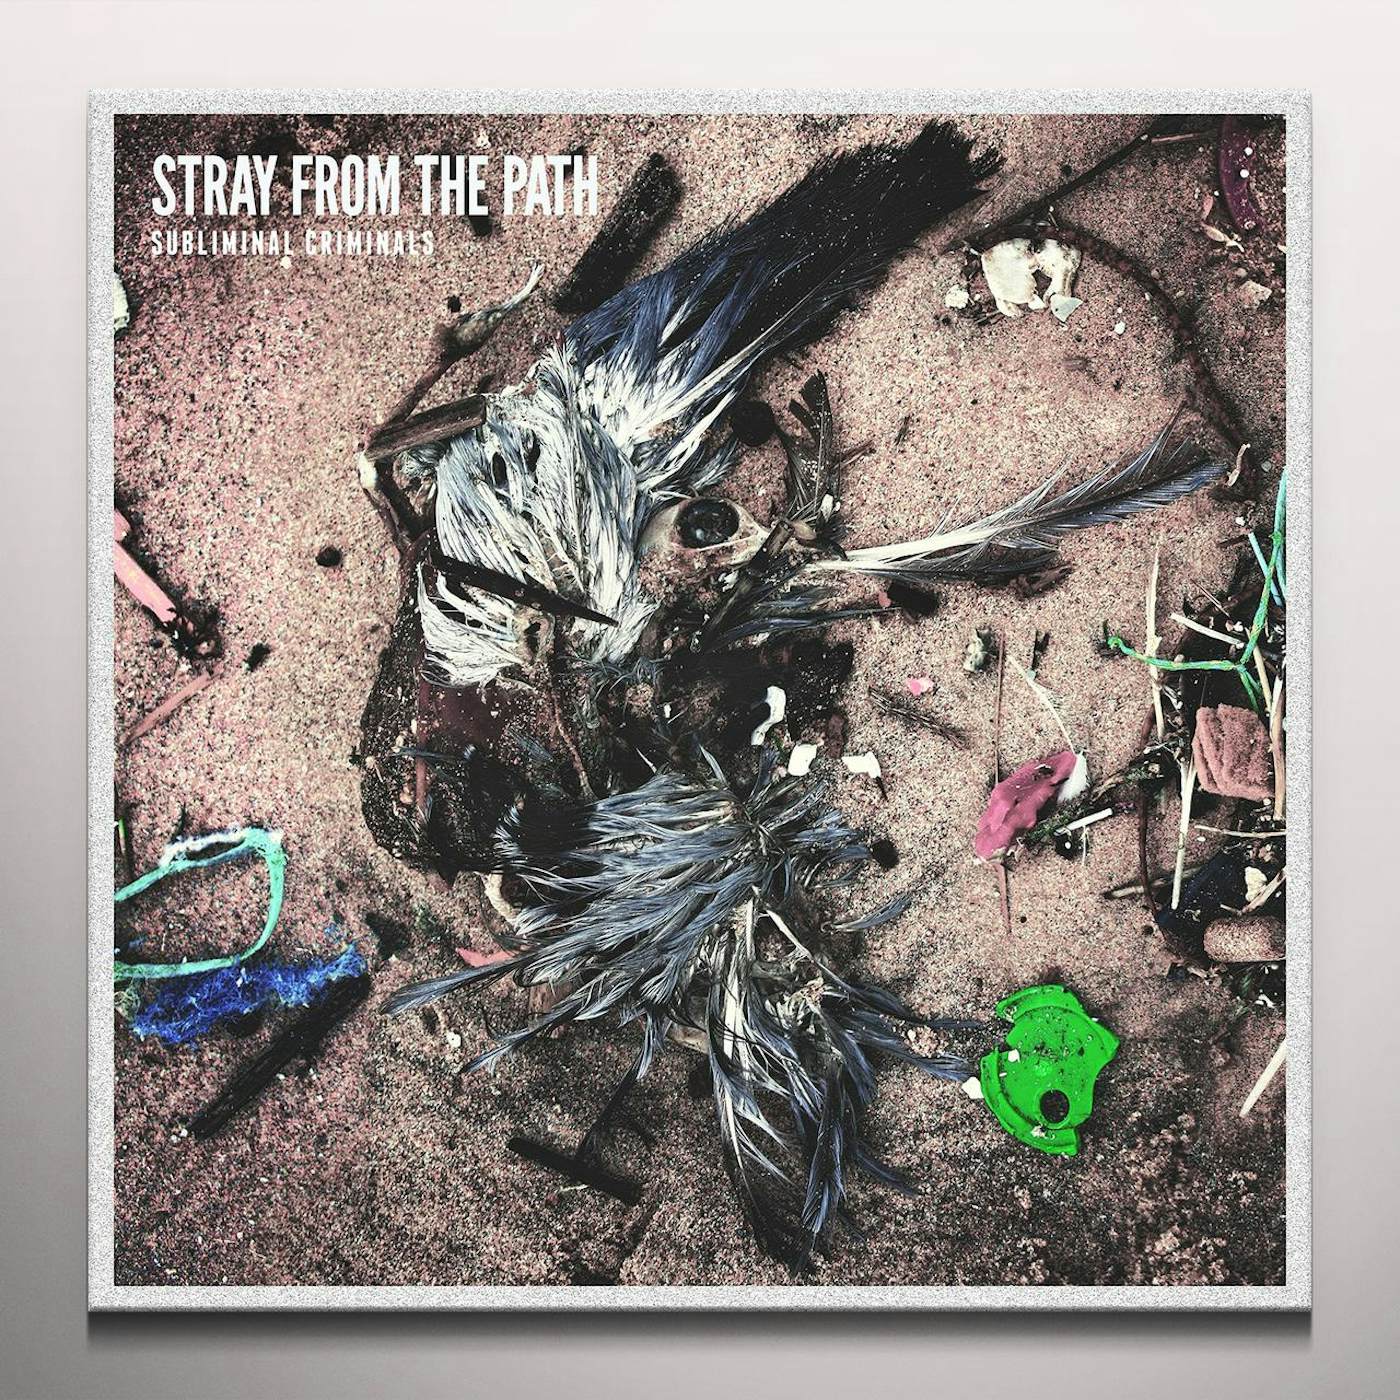 Stray From The Path SUBLIMINAL CRIMINALS (TOXIC SPLATTER) Vinyl Record